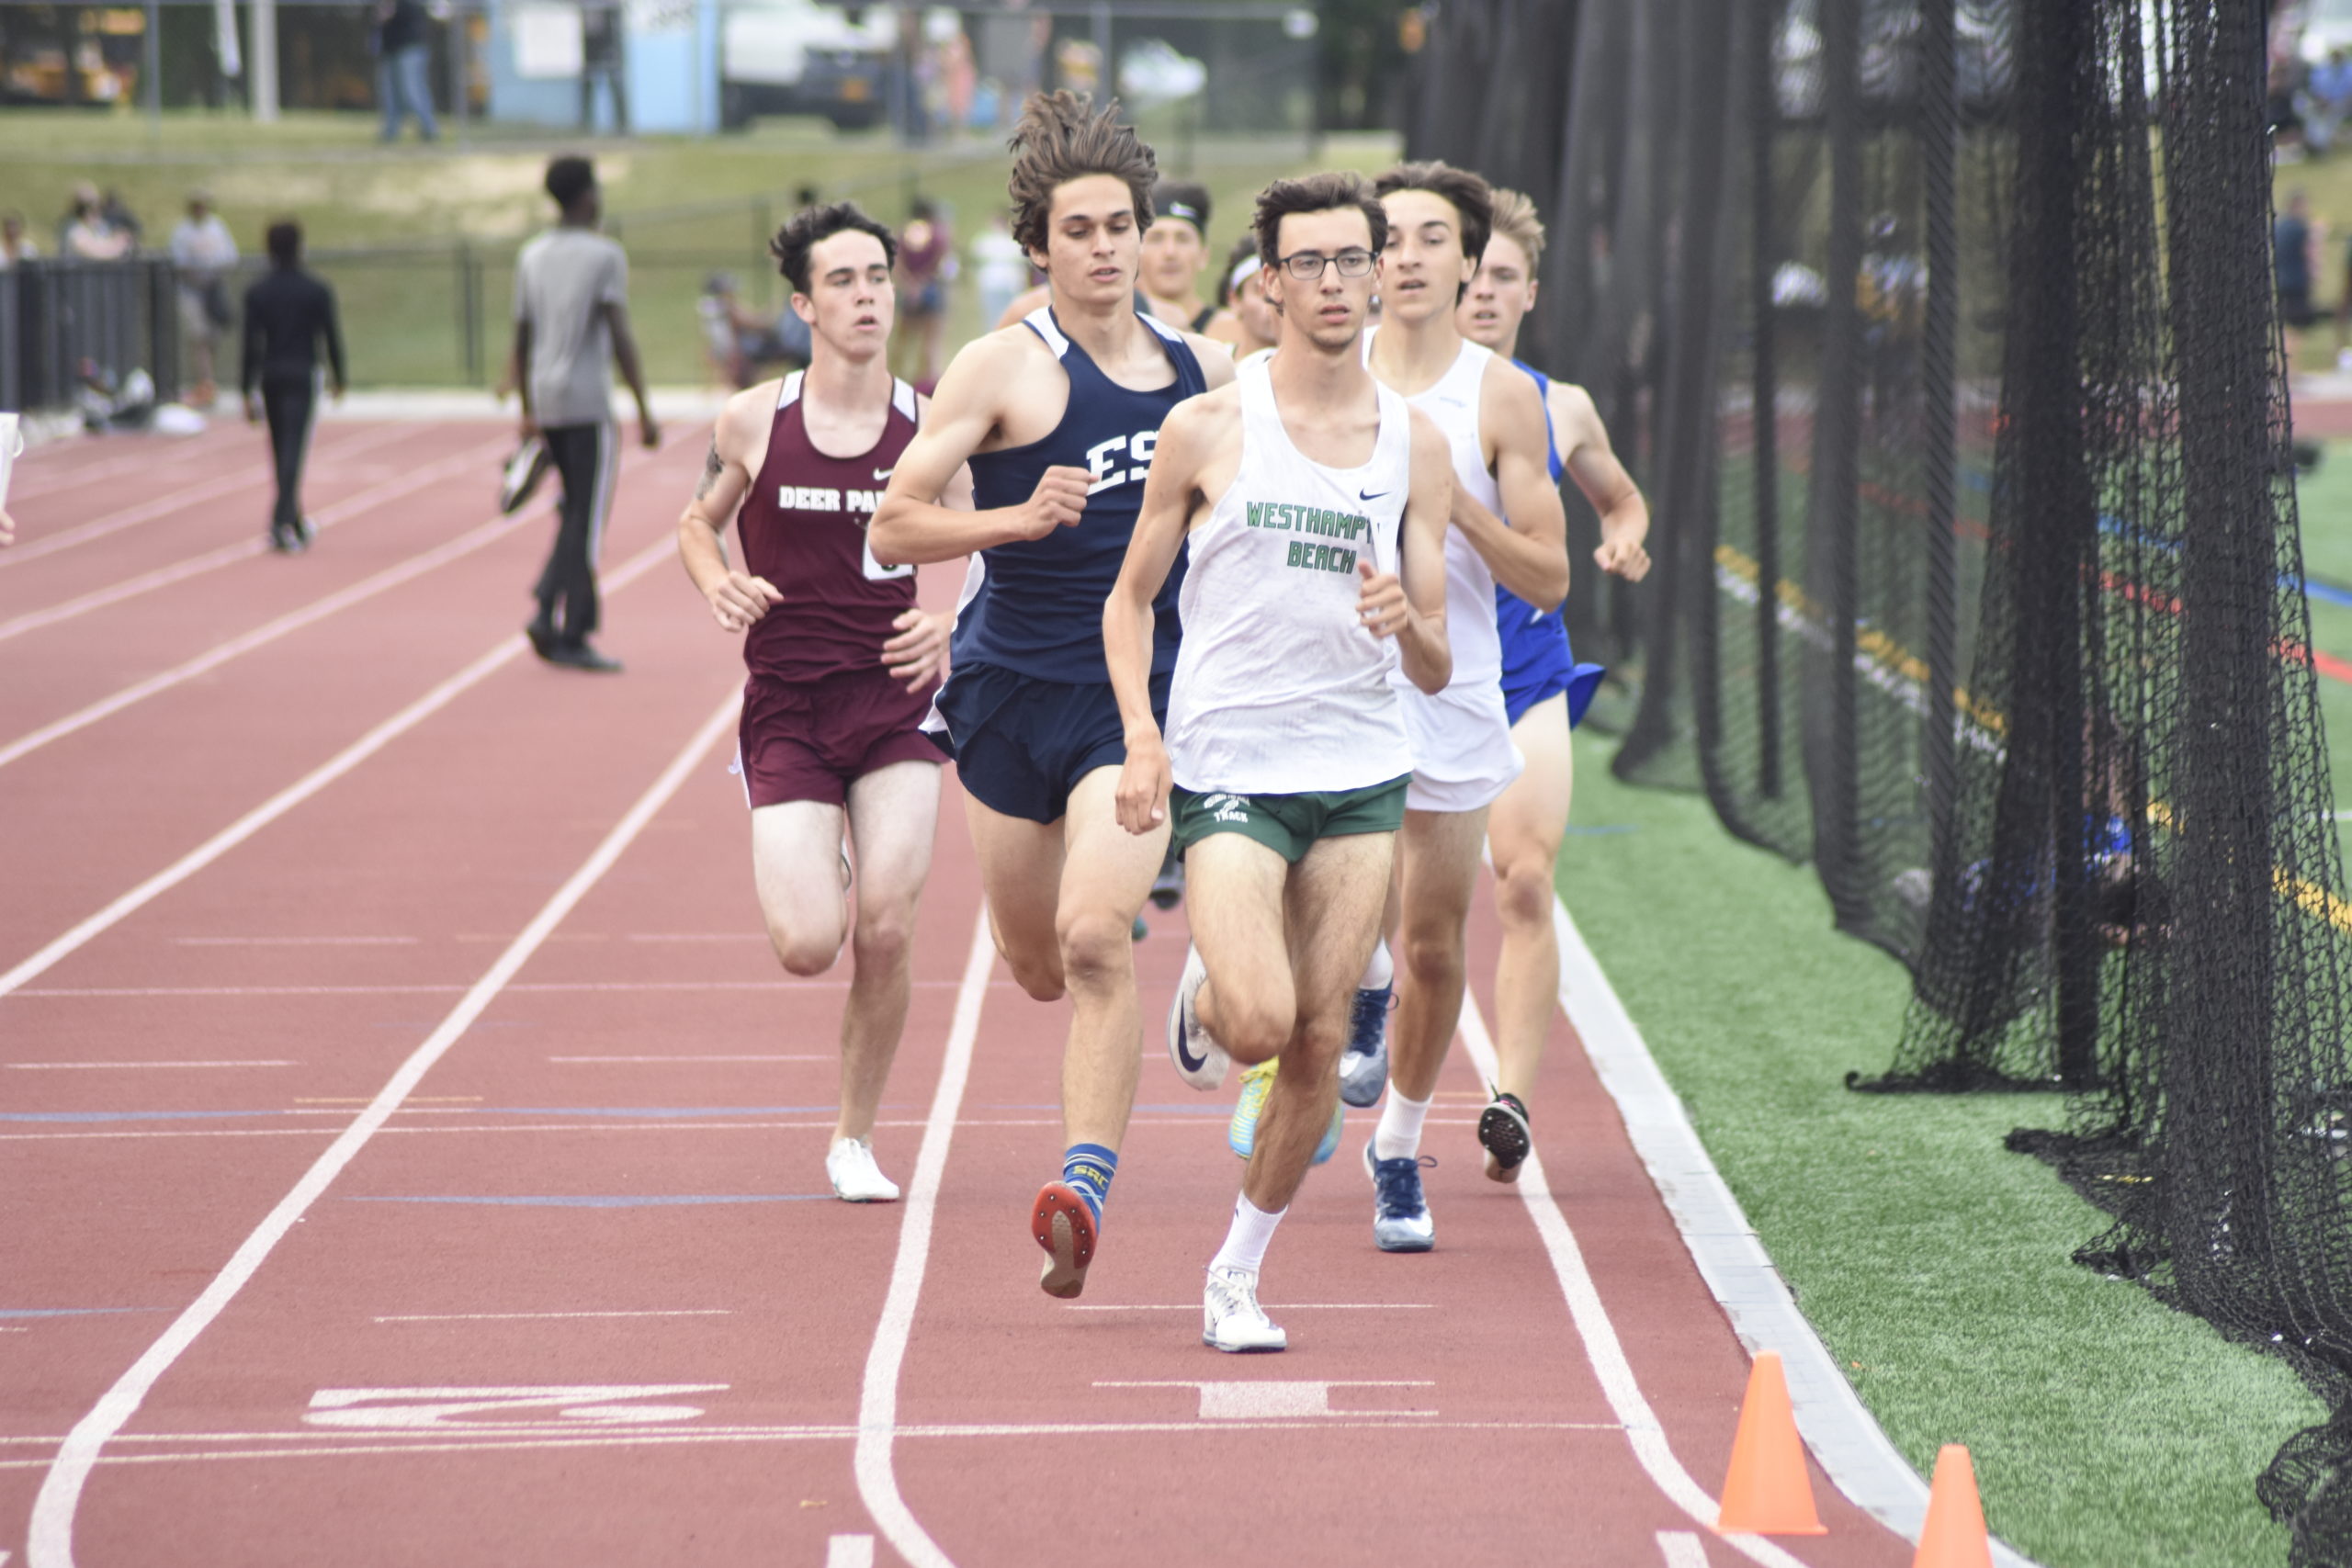 Westhampton Beach junior Gavin Ehlers had to fend off Eastport-South Manor senior Michael Silveri for the county title in the 1,600-meter race on Friday.